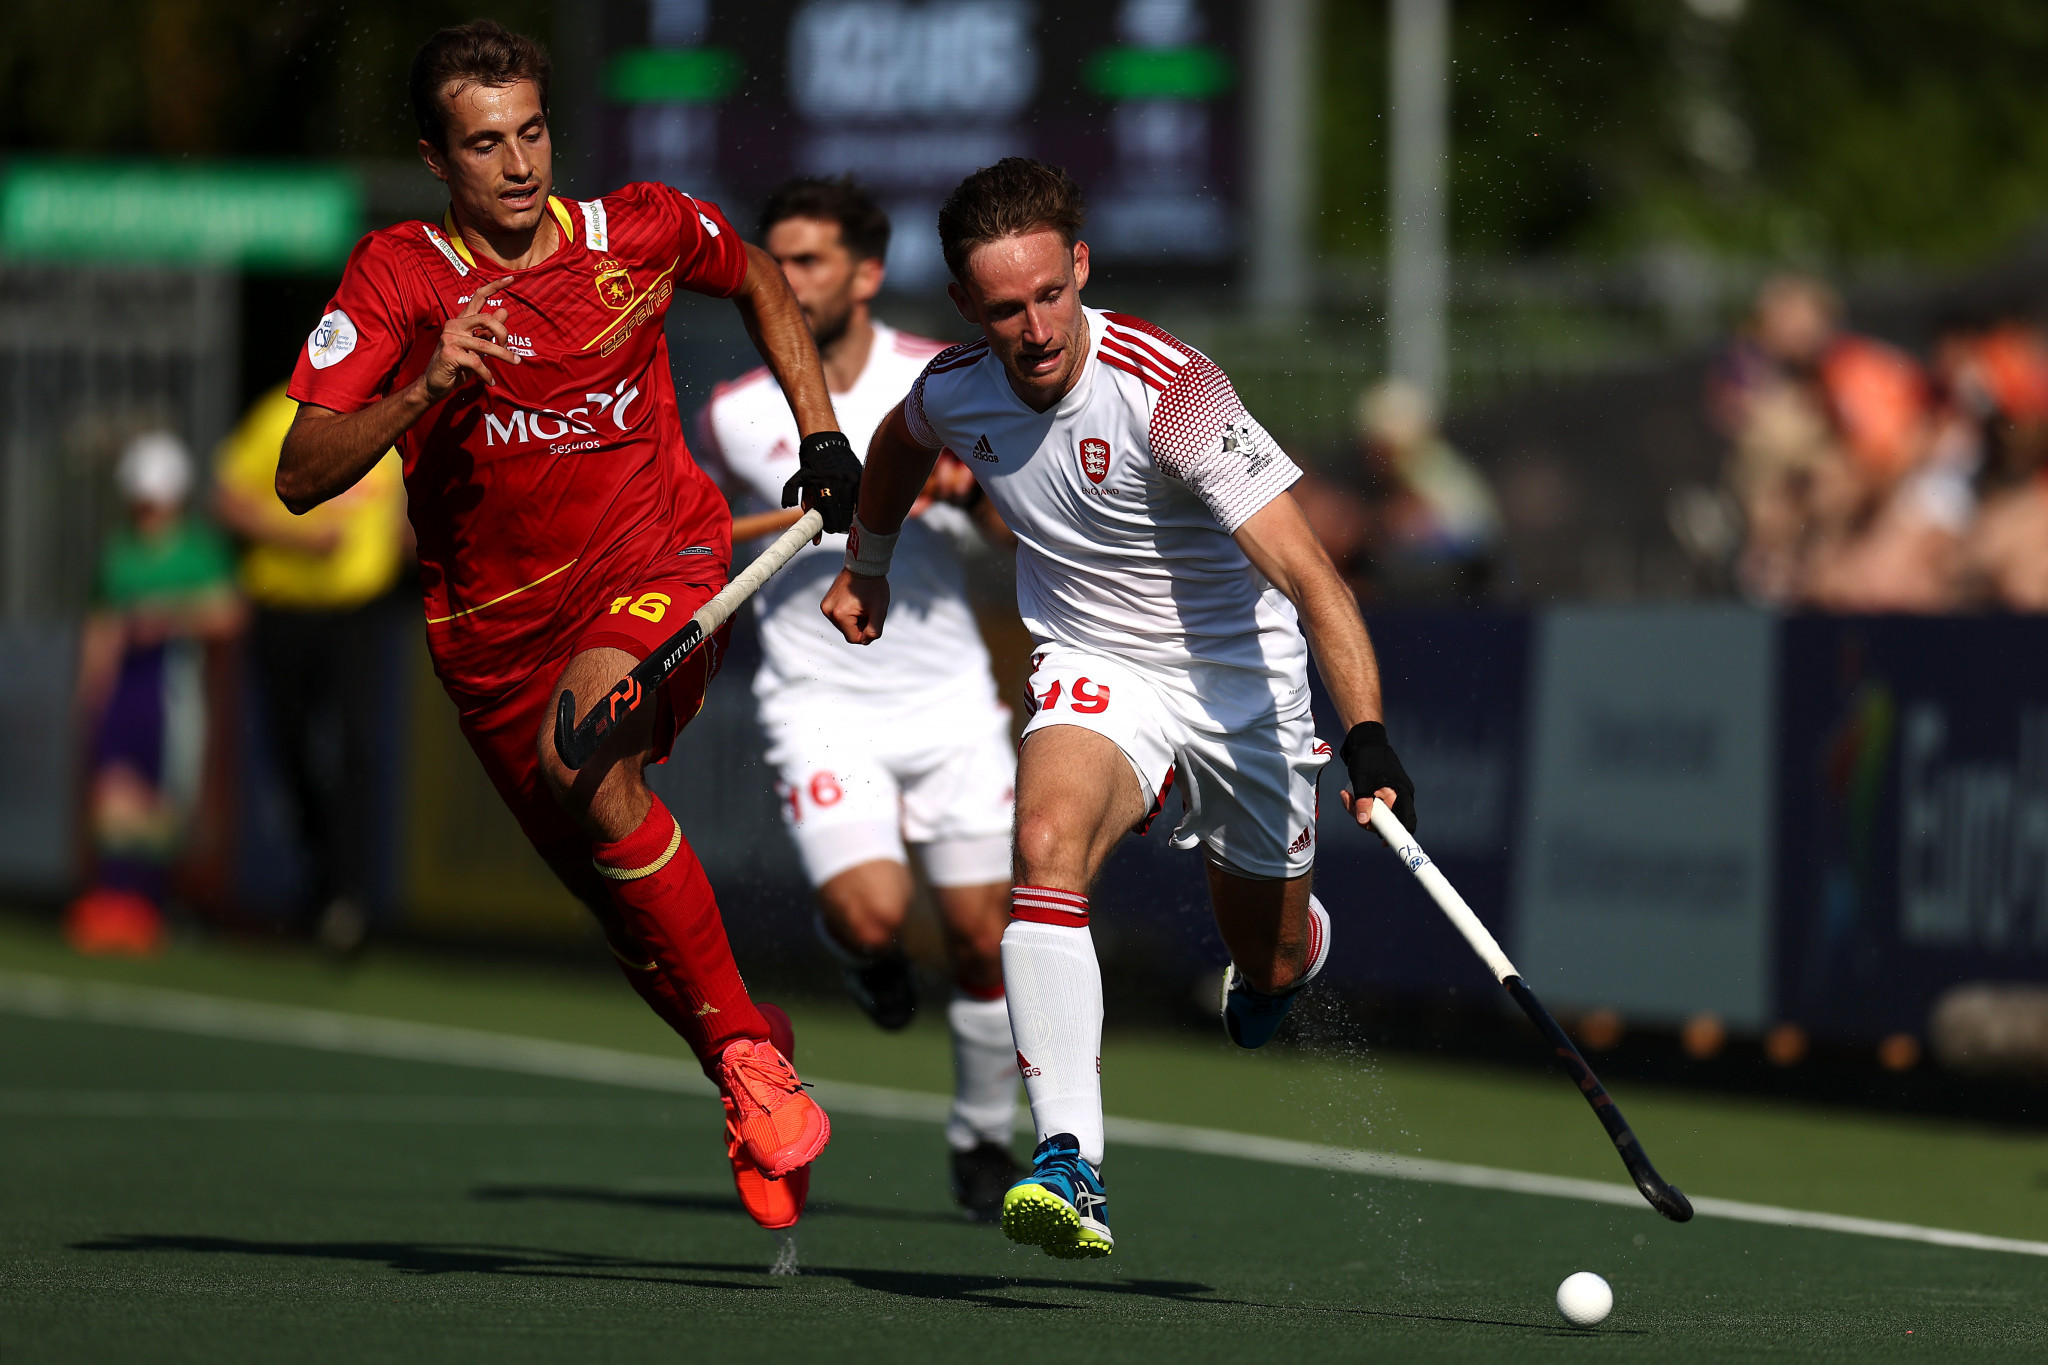 England, playing in white, top Pool A at the men's EuroHockey Championships after defeating Spain ©Getty Images